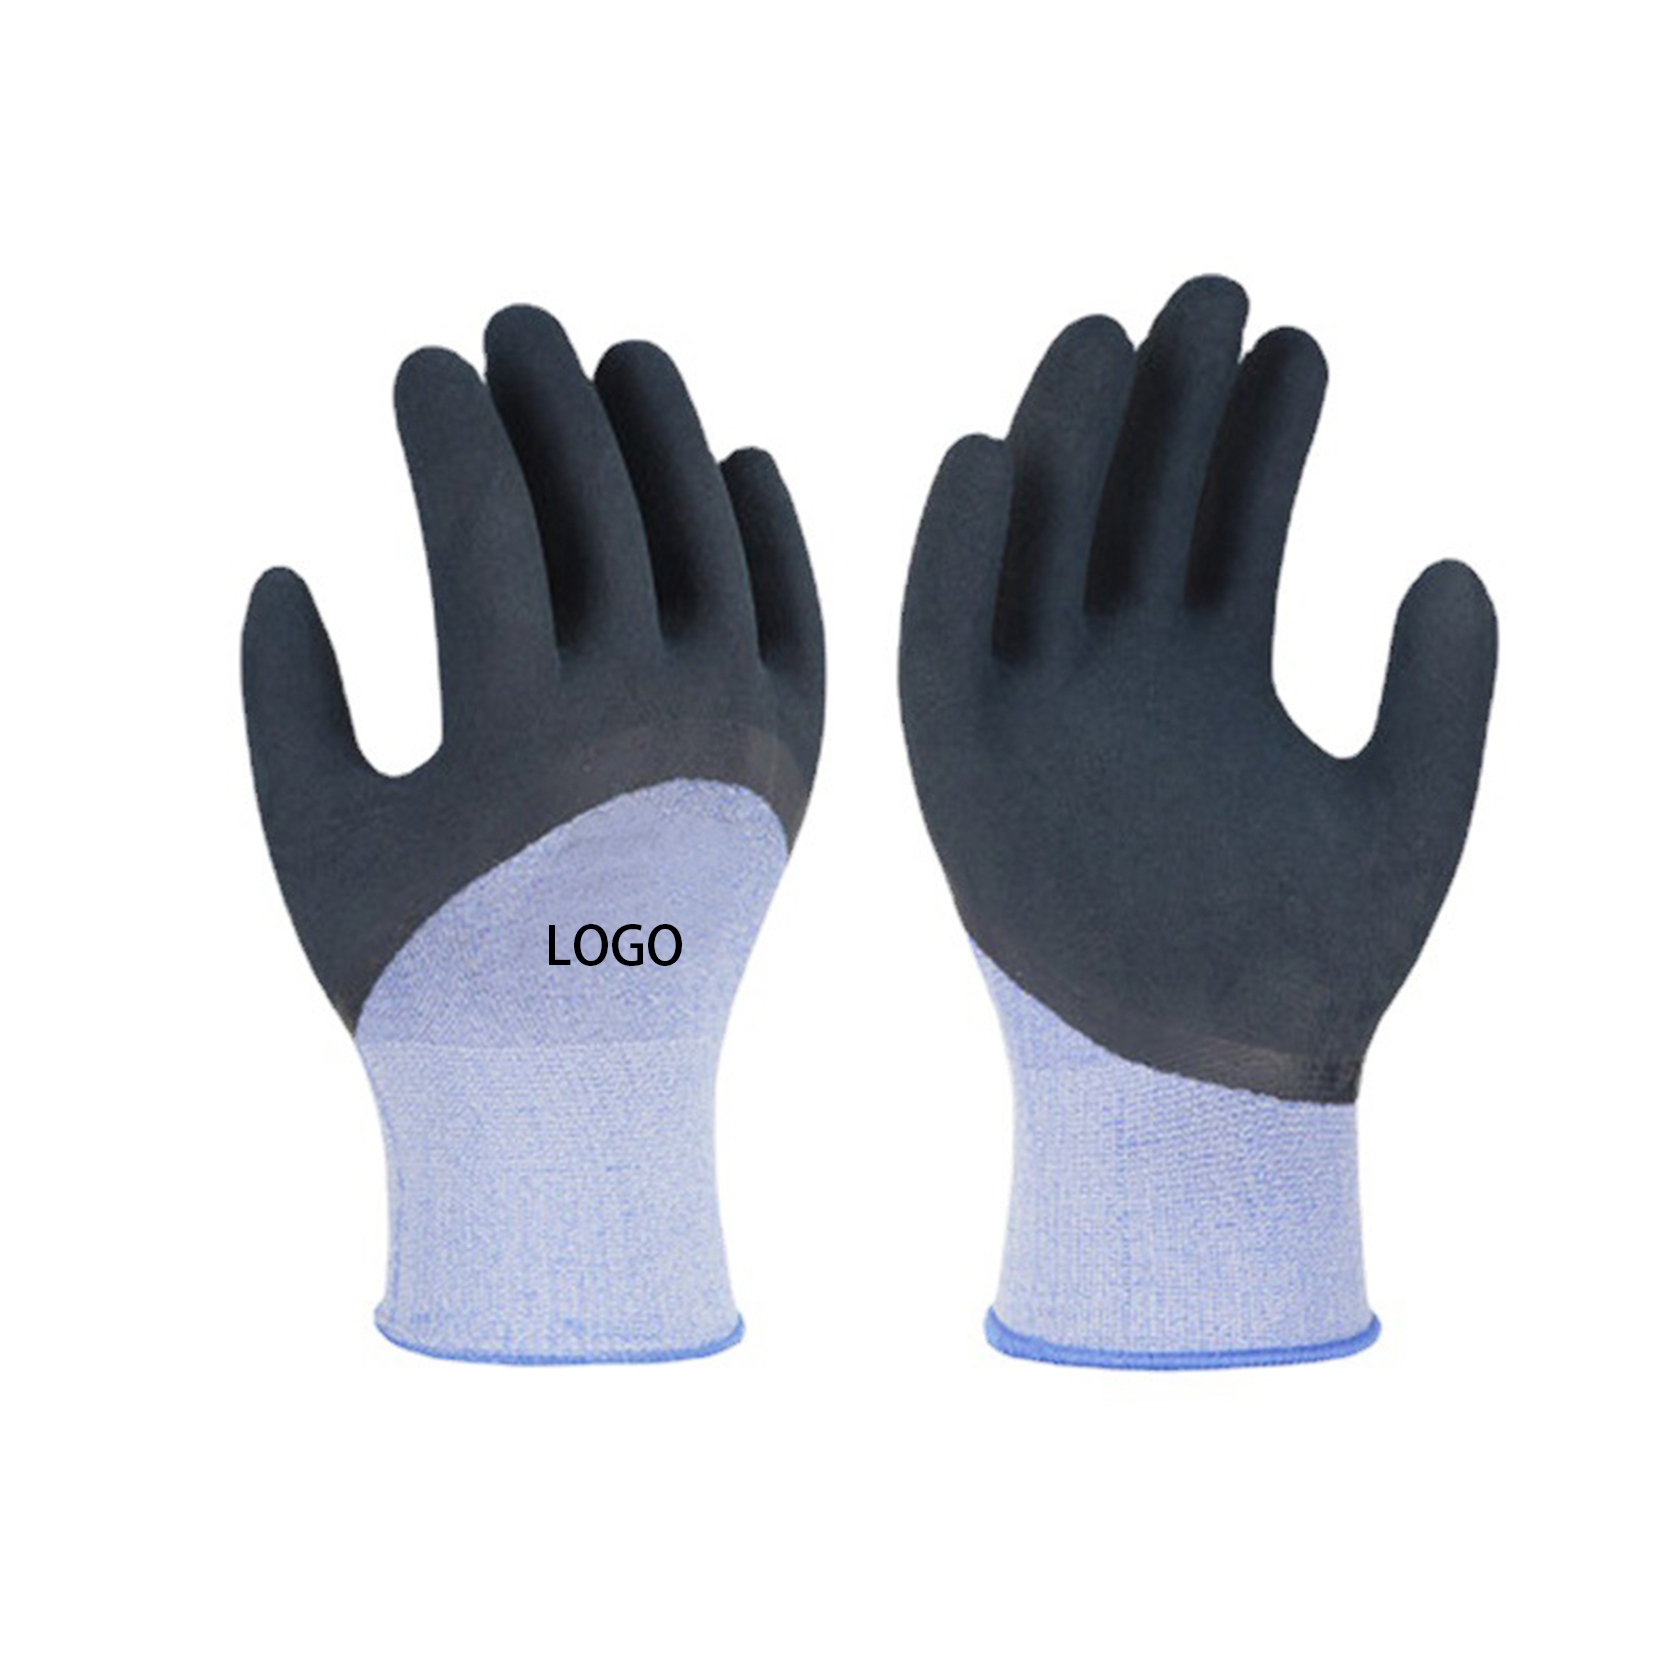 Guante Blue Latex Rubber Dipping Coated Cut Resistant Construction Protect Work Safety Gloves